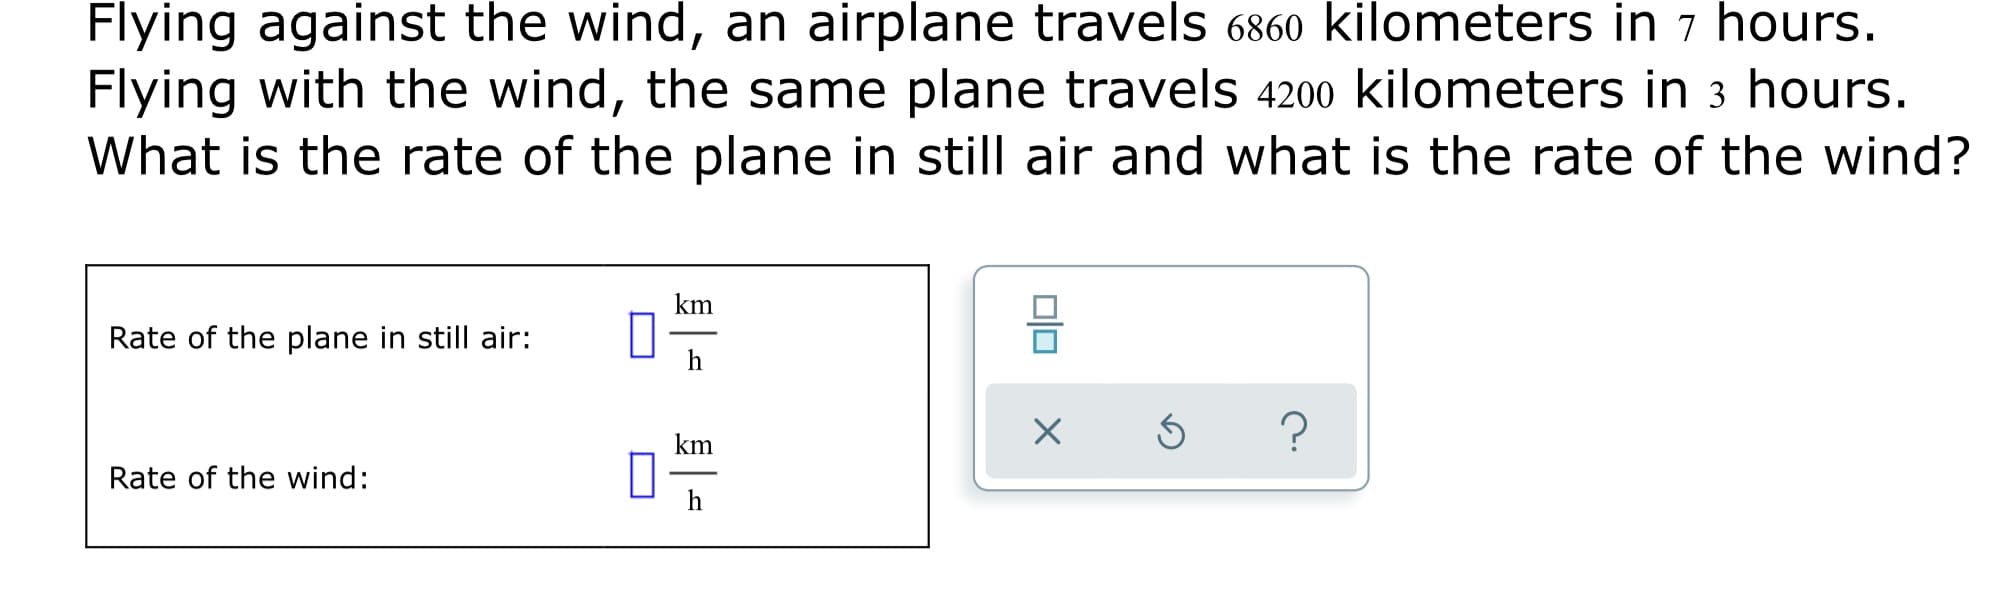 against the wind, an airplane travels 6860 kilometers in 7 hours.
Flying
Flying with the wind, the same plane travels 4200 kilometers in 3 hours.
What is the rate of the plane in still air and what is the rate of the wind?
km
Rate of the plane in still air:
h
km
Rate of the wind:
